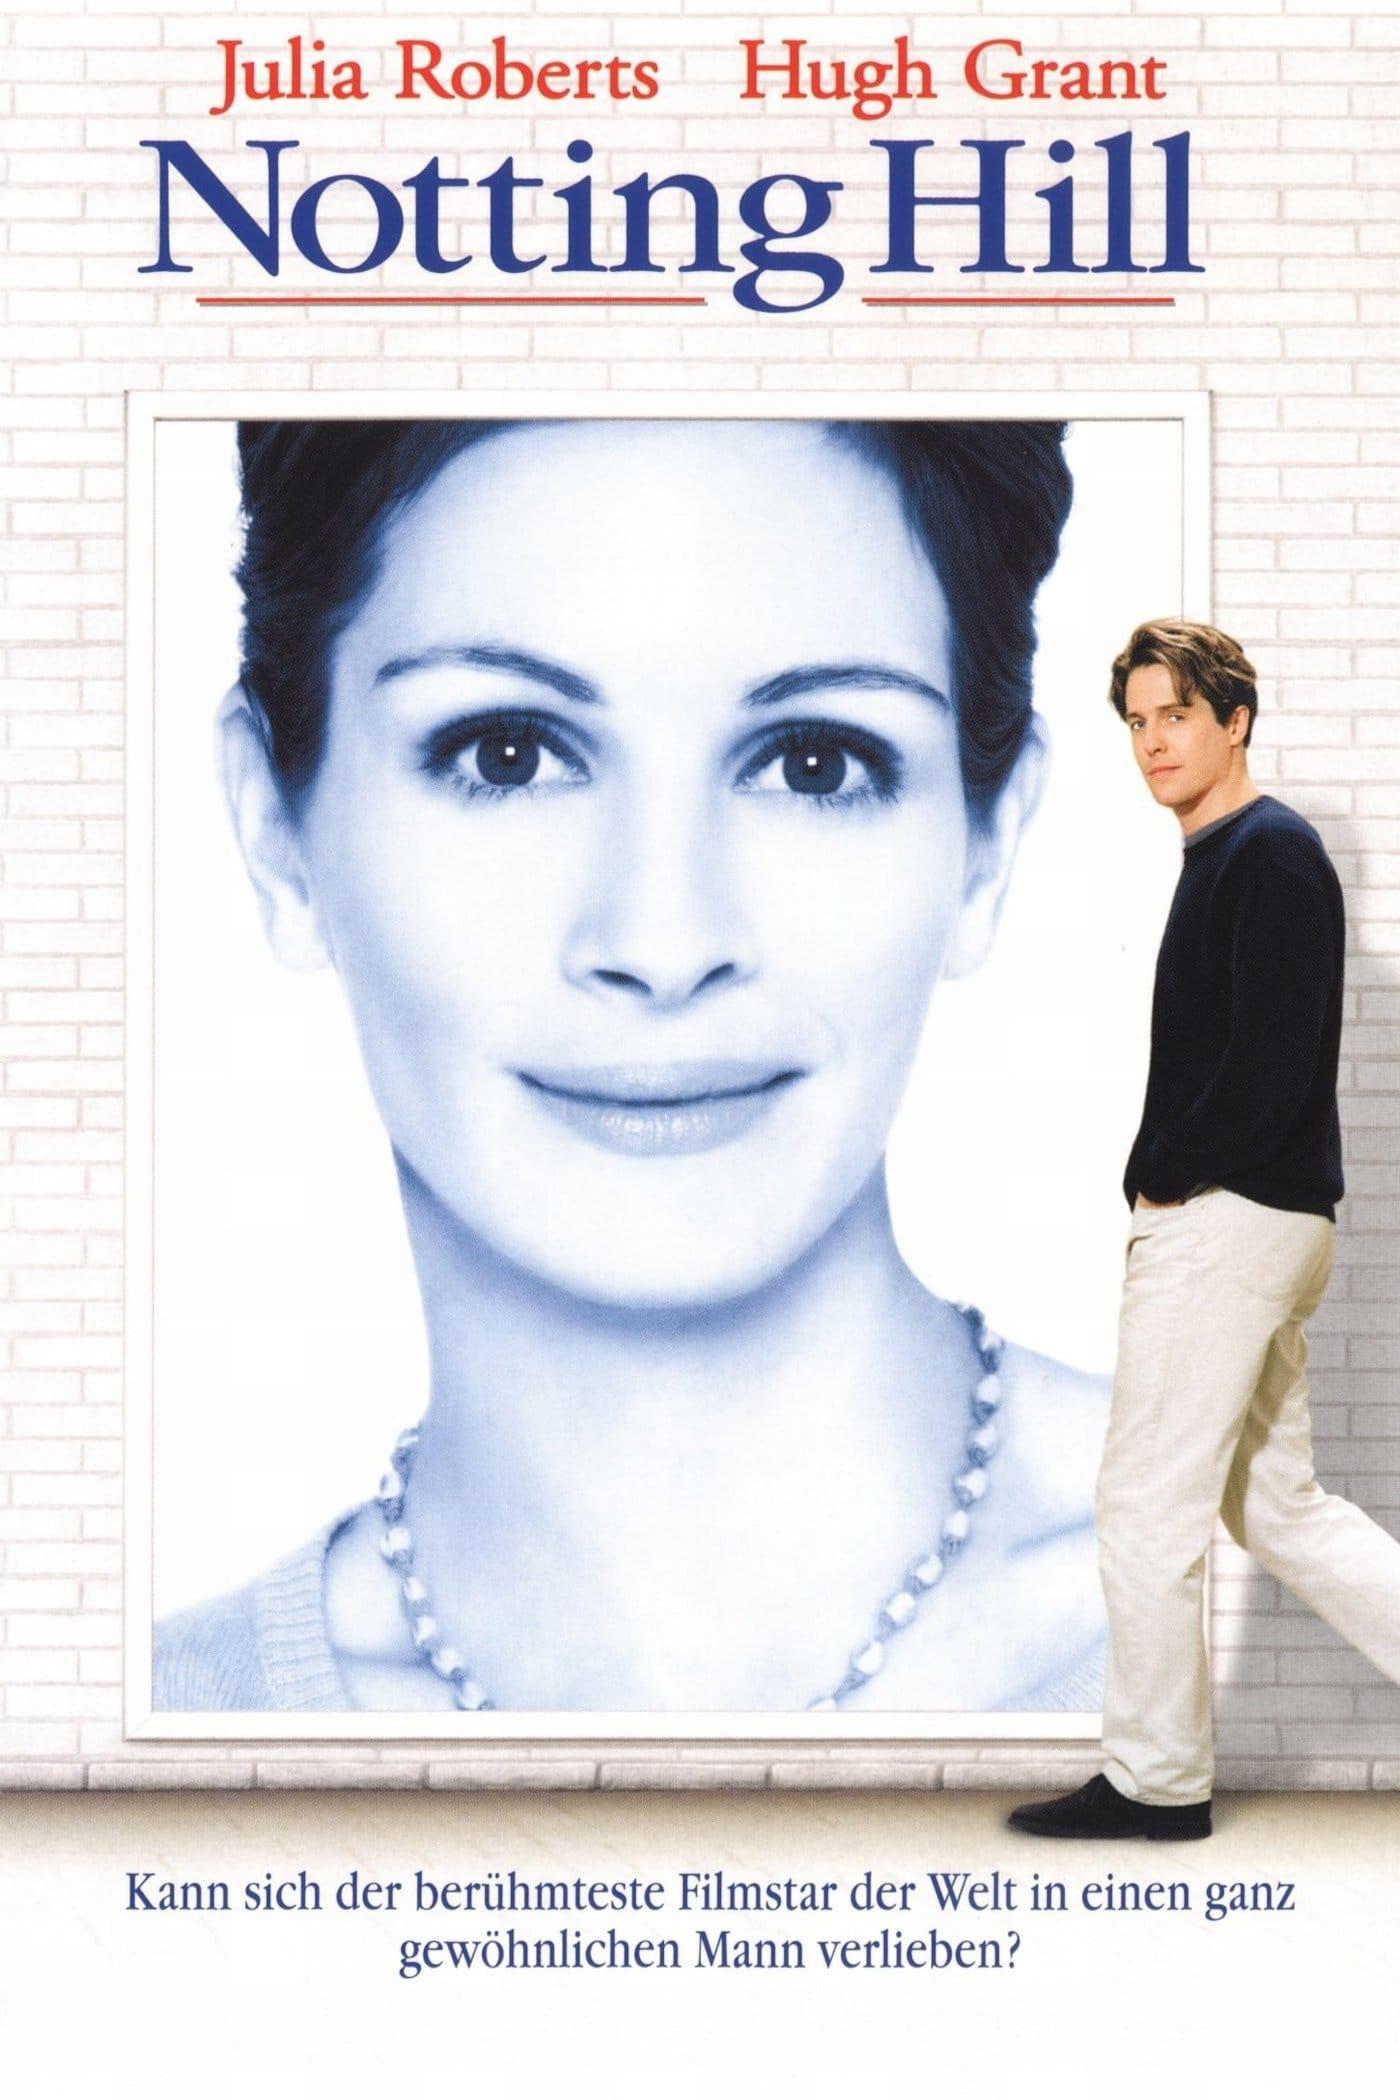 Notting Hill Wallpapers